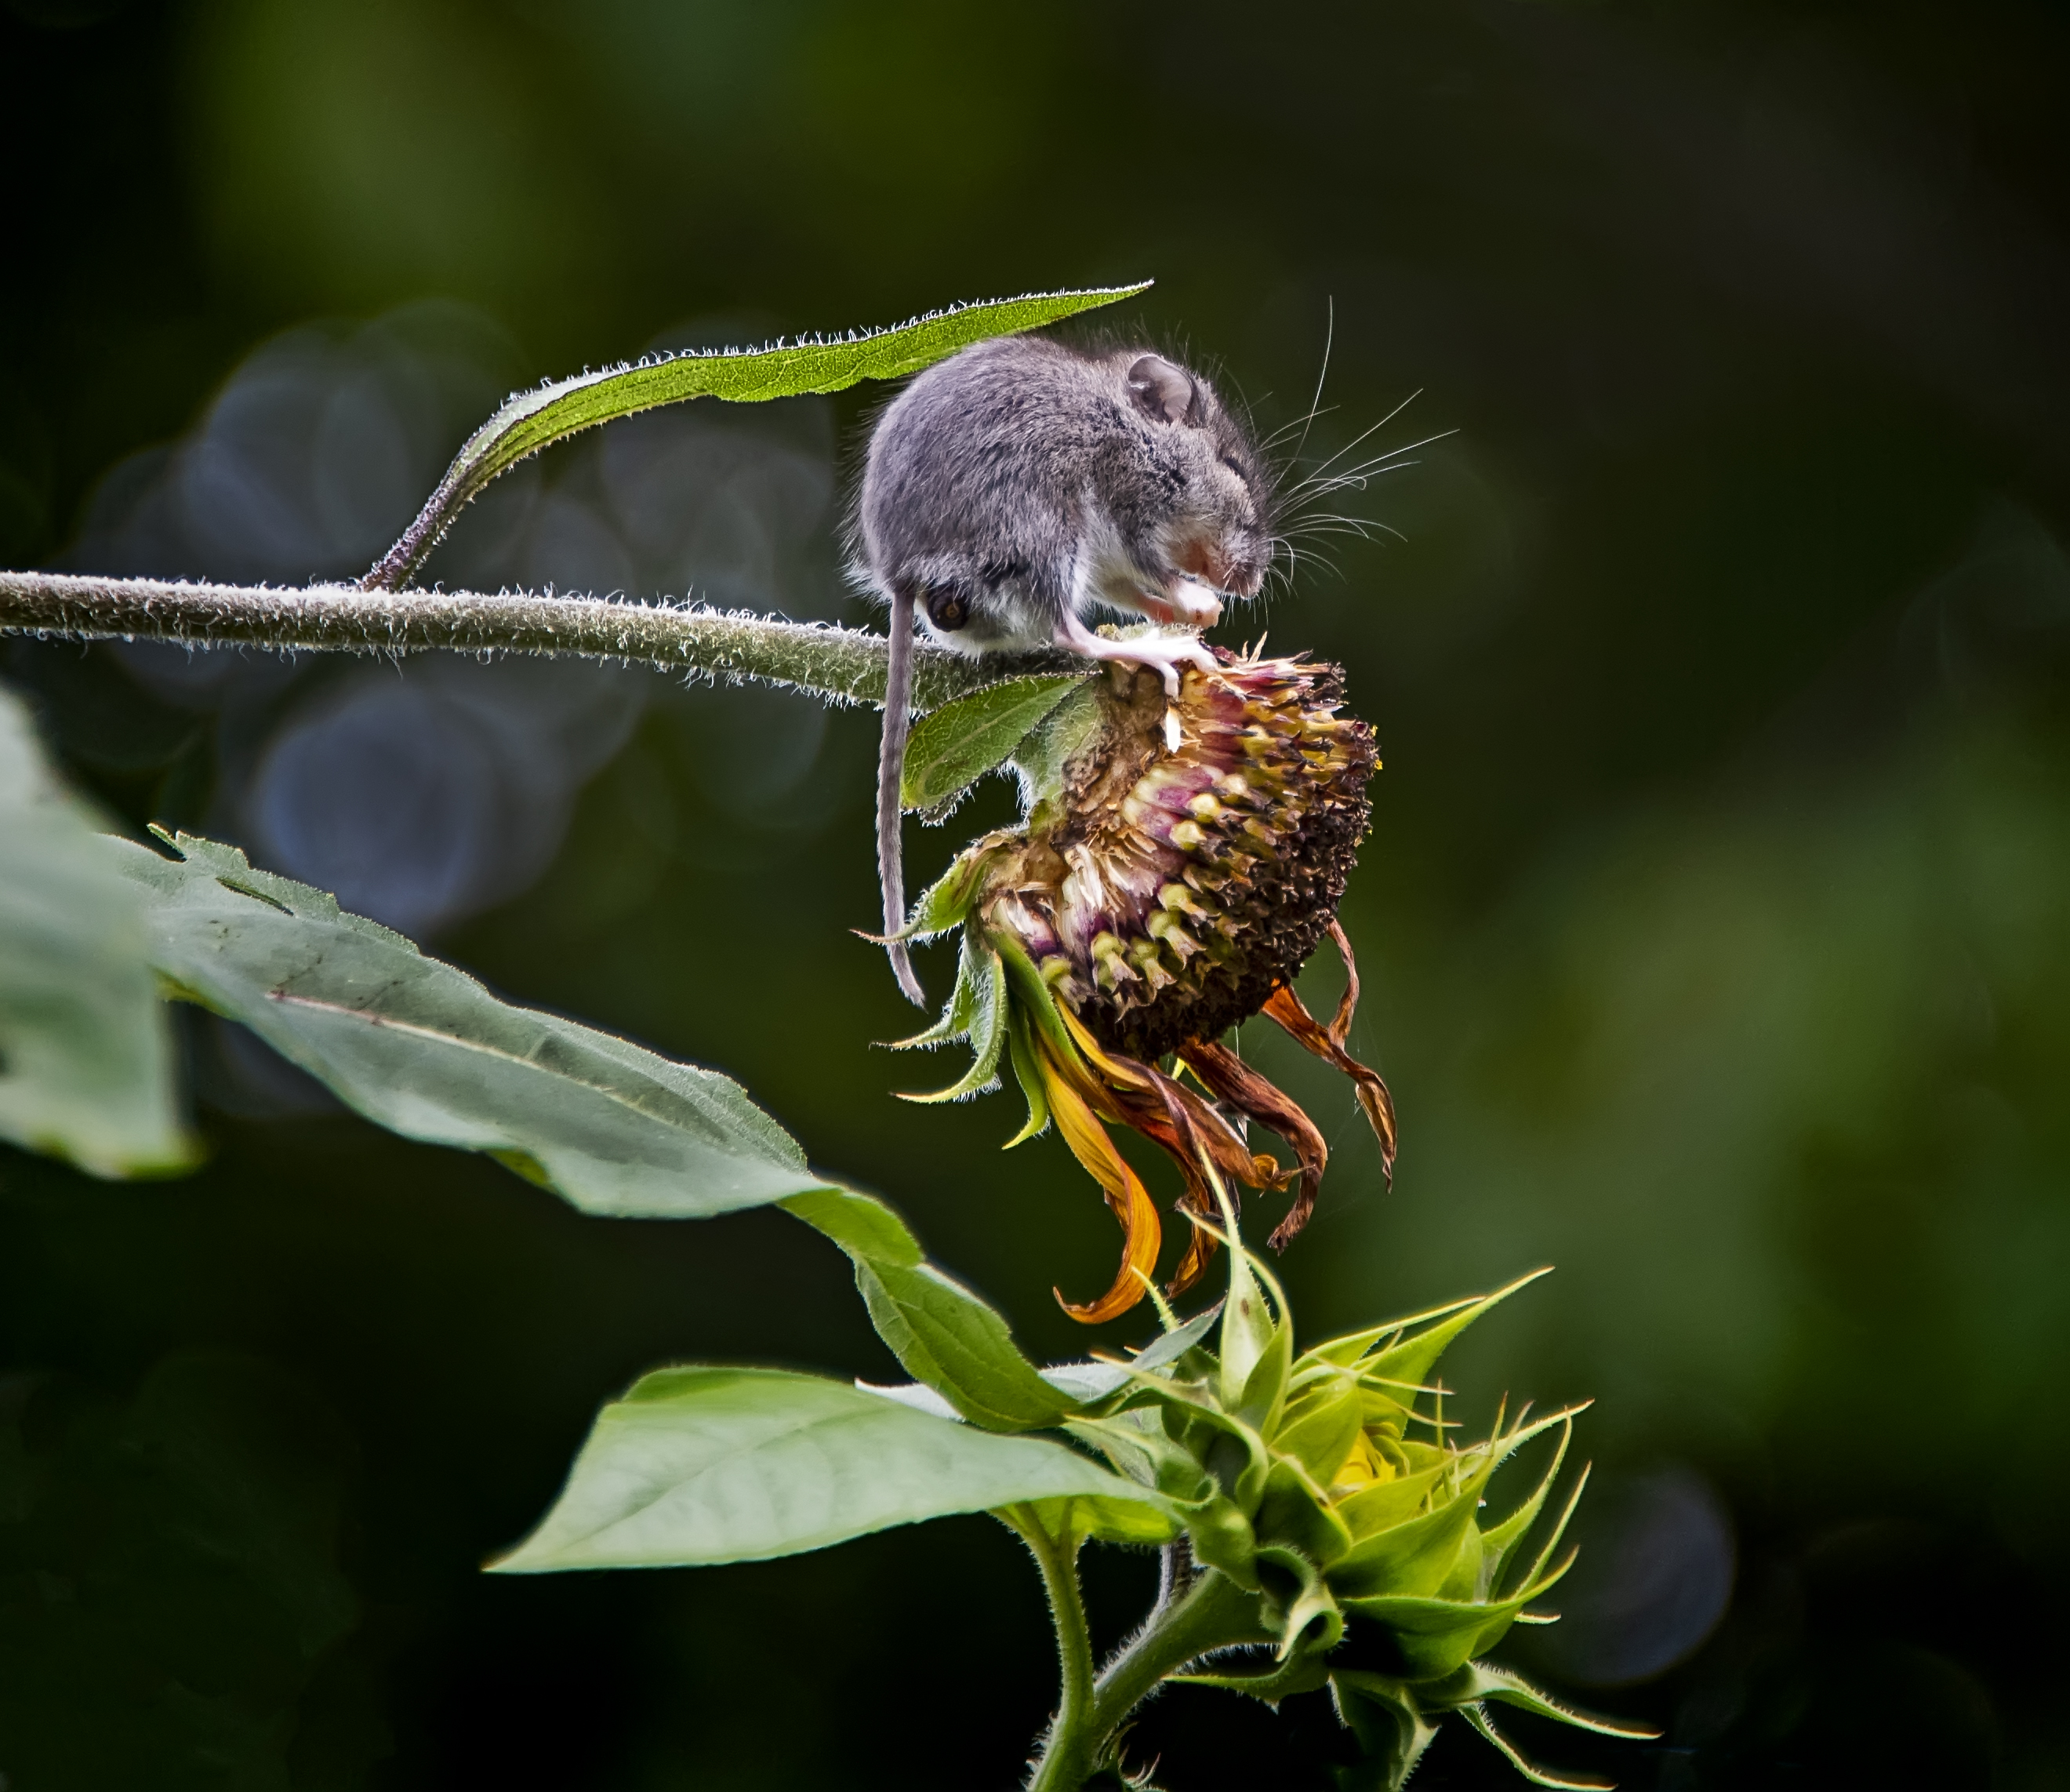 Field Mouse on Sunflower